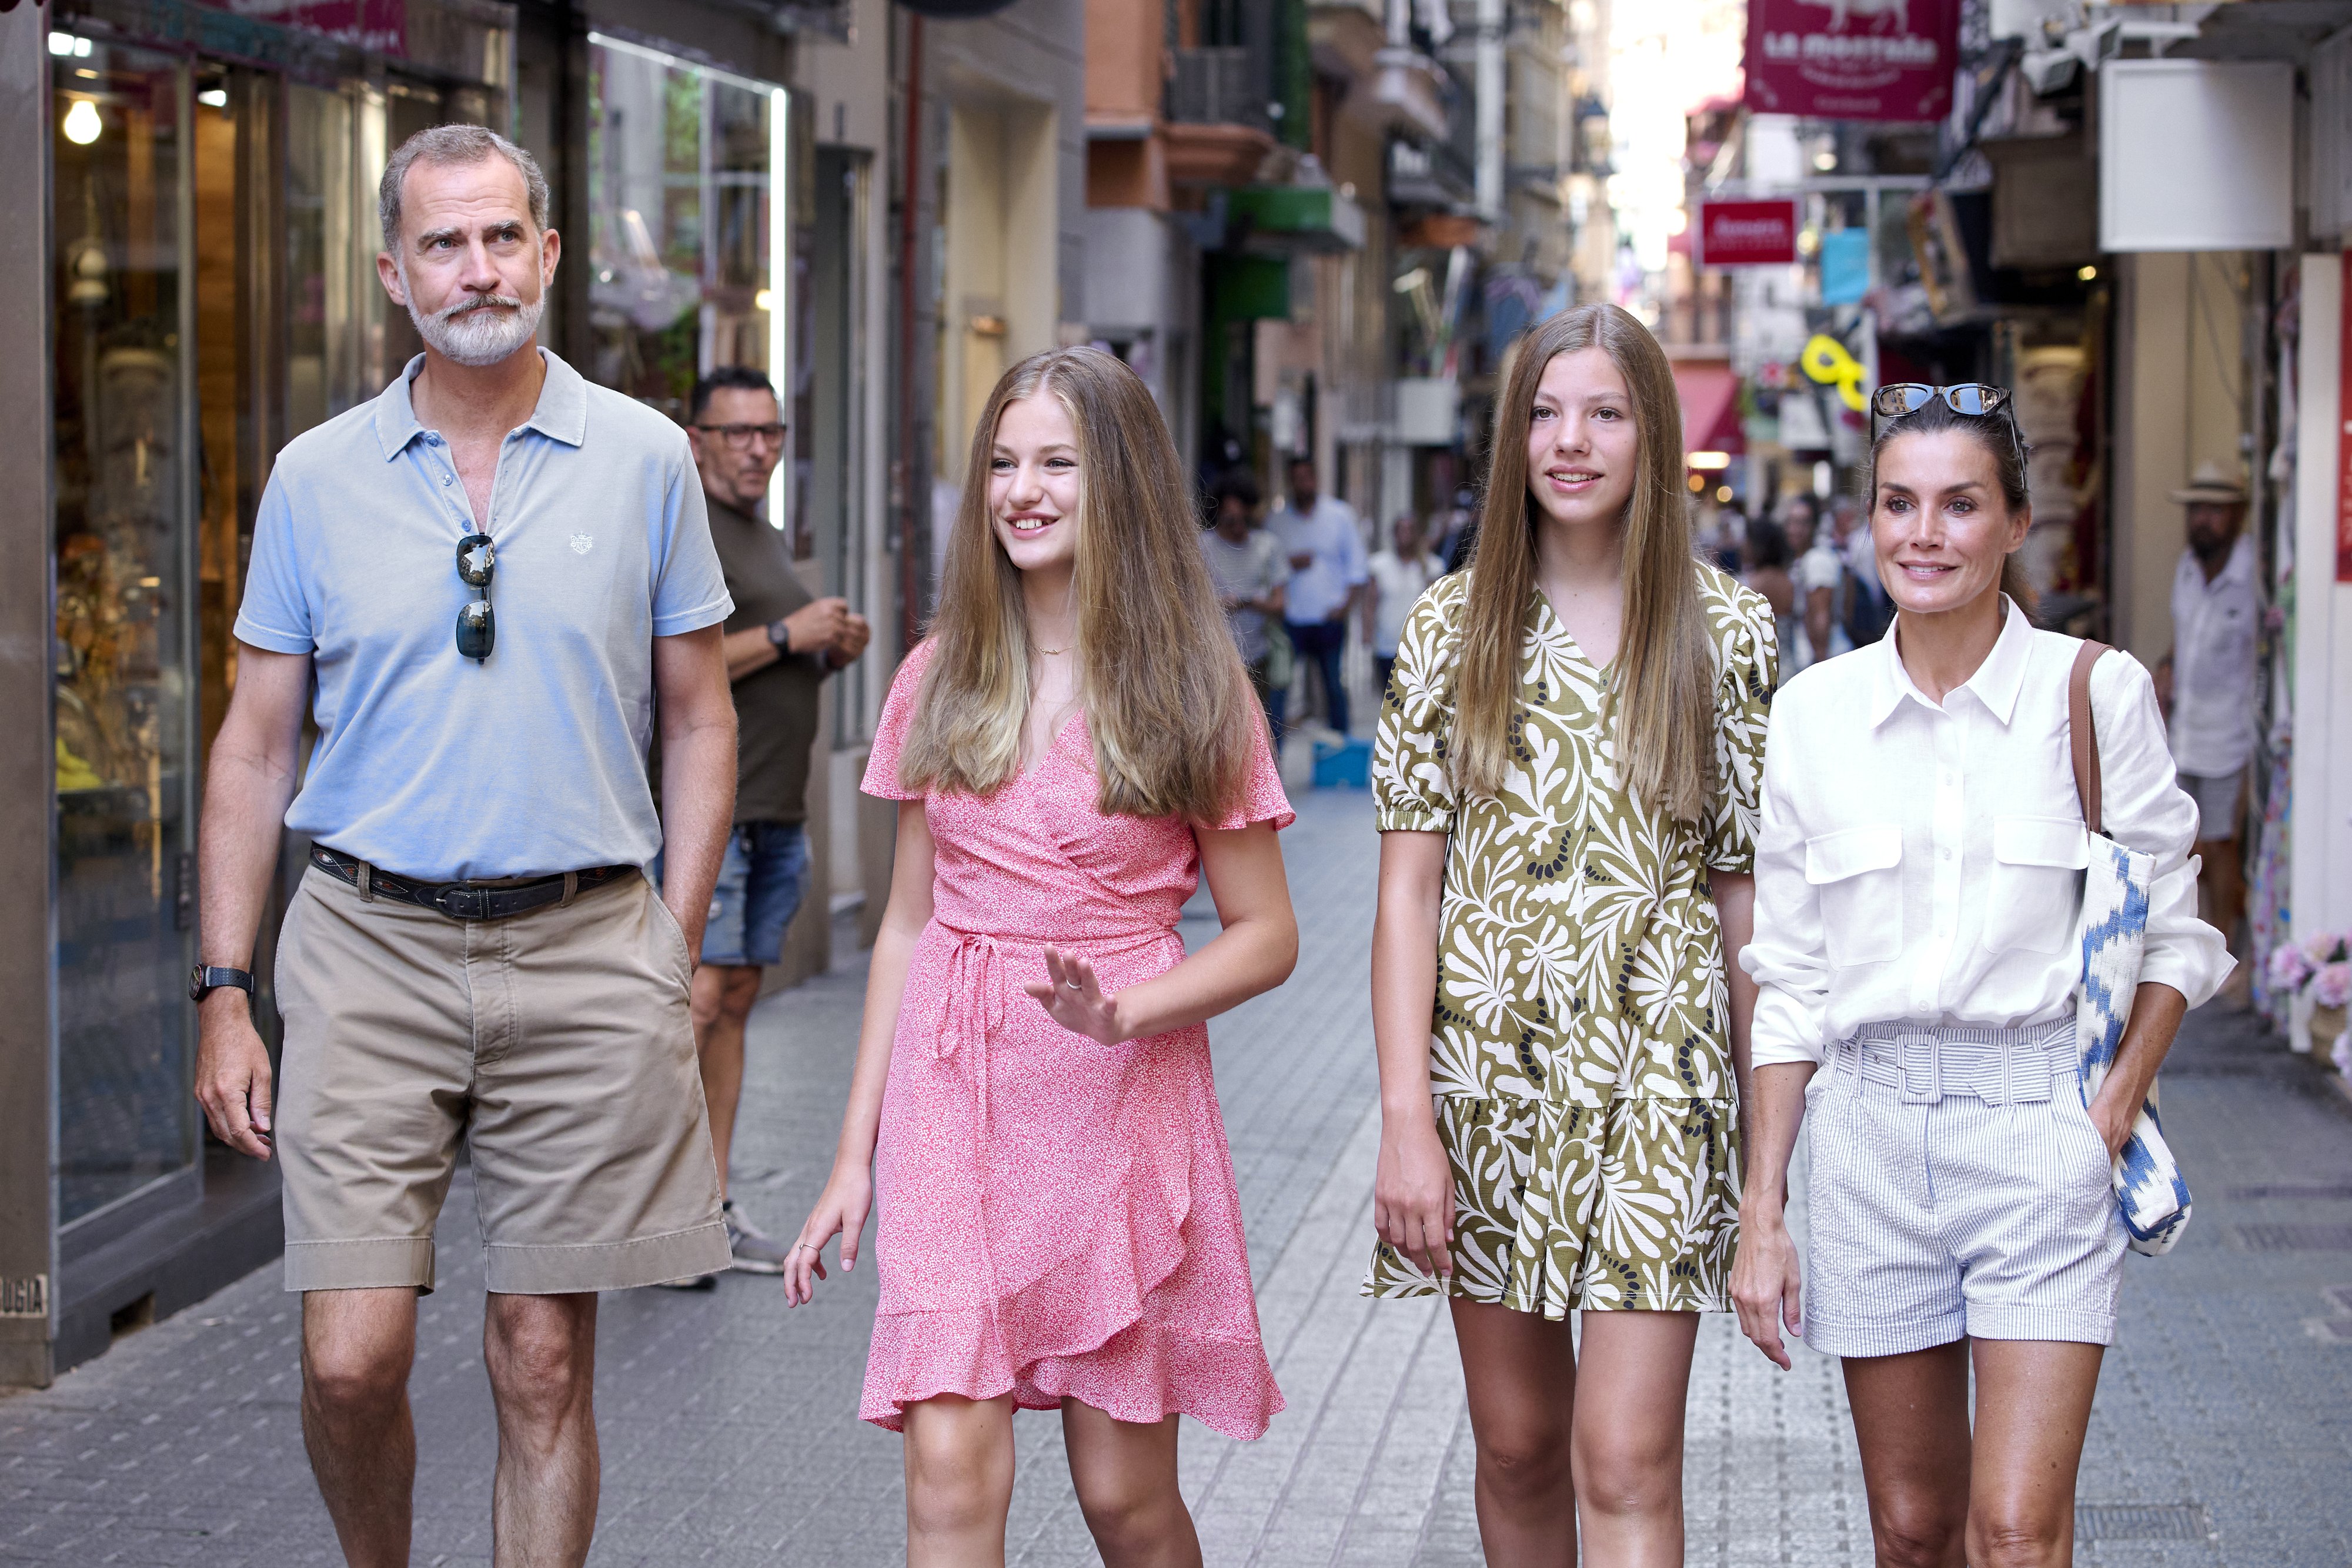 King Felipe VI of Spain, Crown Princess Leonor of Spain, Princess Sofia of Spain, and Queen Letizia of Spain seen walking through the city center during their vacation on August 10, 2022, in Palma de Mallorca, Spain | Source: Getty Images